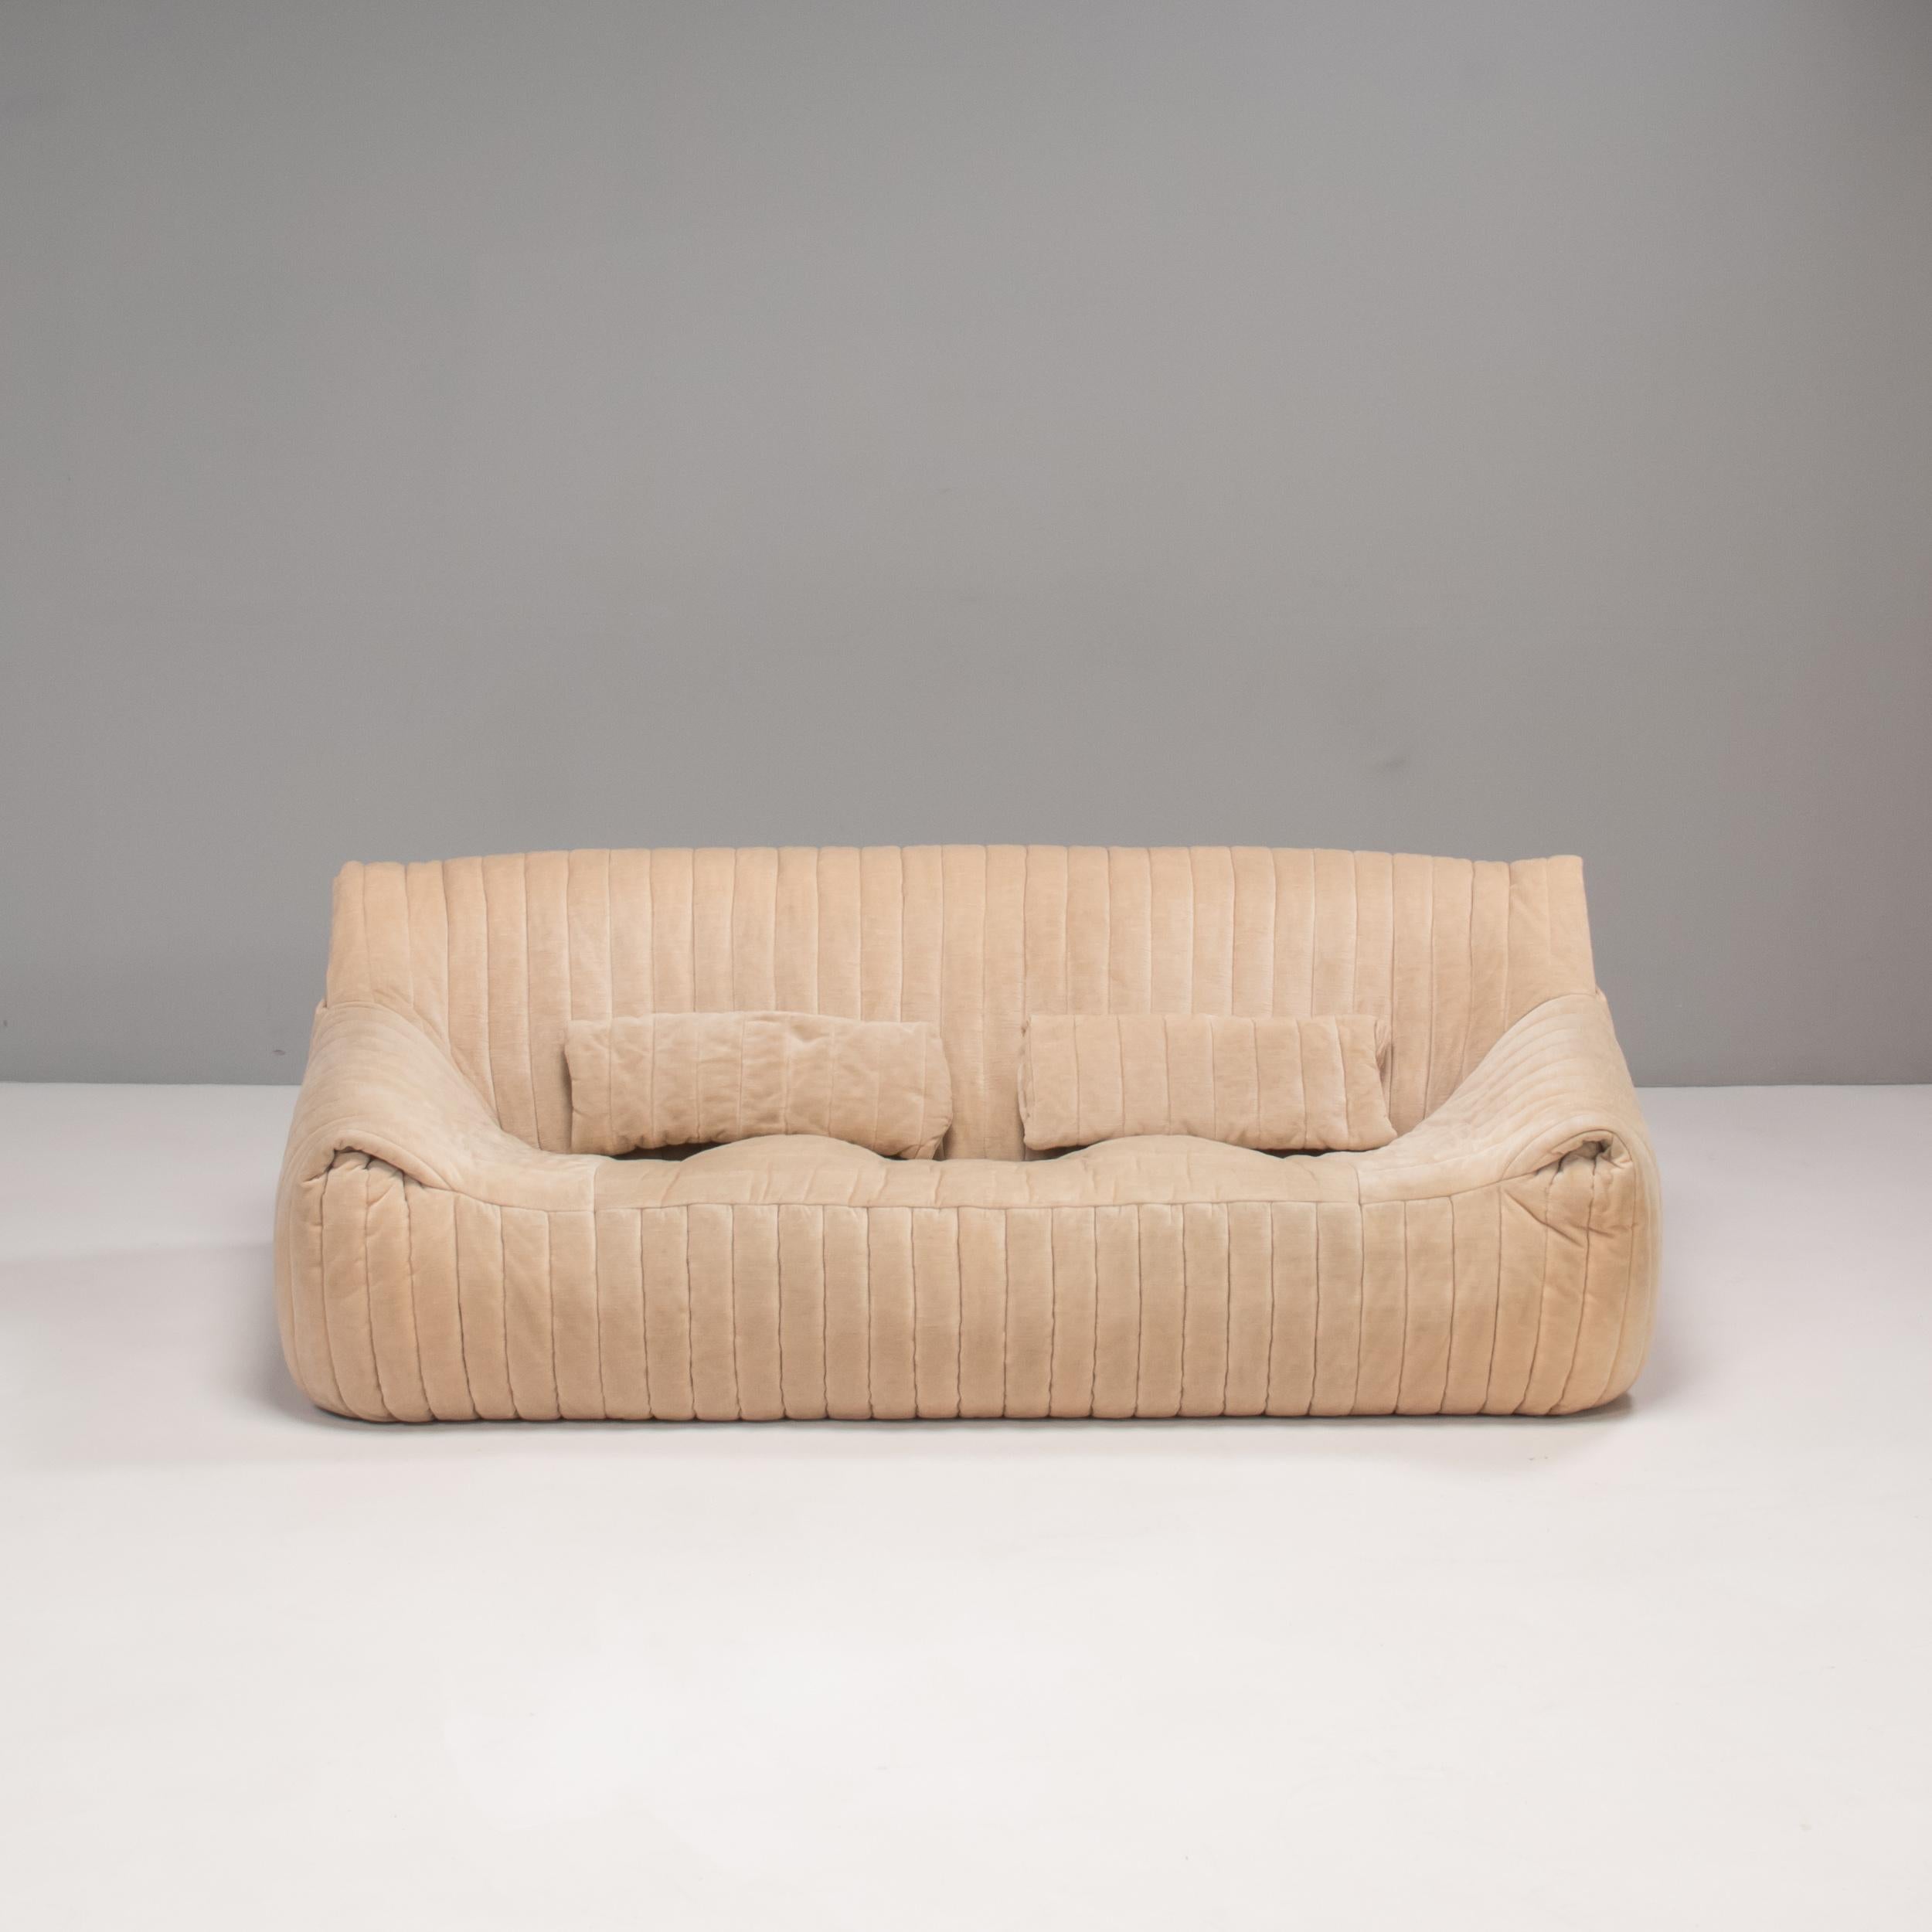 An iconic 1970s design, the Sandra sofa was designed by Annie Hiéronimus for Cinna after she joined the Roset Bureau d'Etudes in 1976.

Constructed from foam, the sofa has a solid form which is fully upholstered in soft biscuit beige ribbed